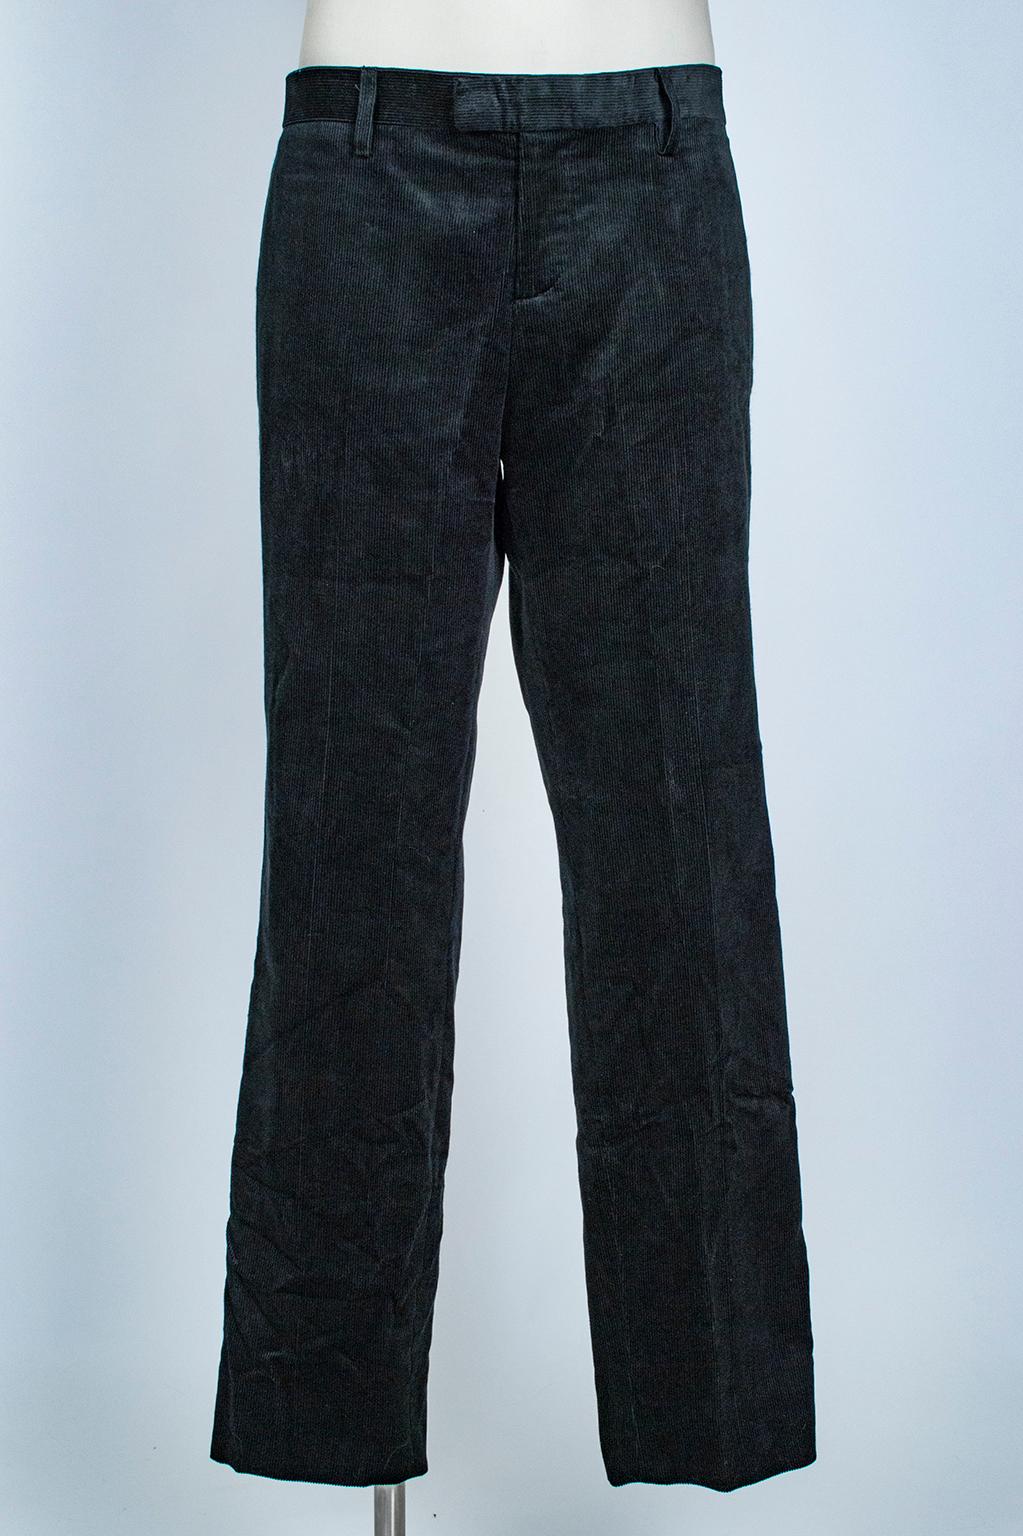 A clever play on sporty vs. dressy, these trousers combine the casual ease of wide wale corduroy with tuxedo pant details like lengthwise velvet side stripes and satin pocket trim. A unique pant that imparts luxury to daytime dressing.

Wide wale